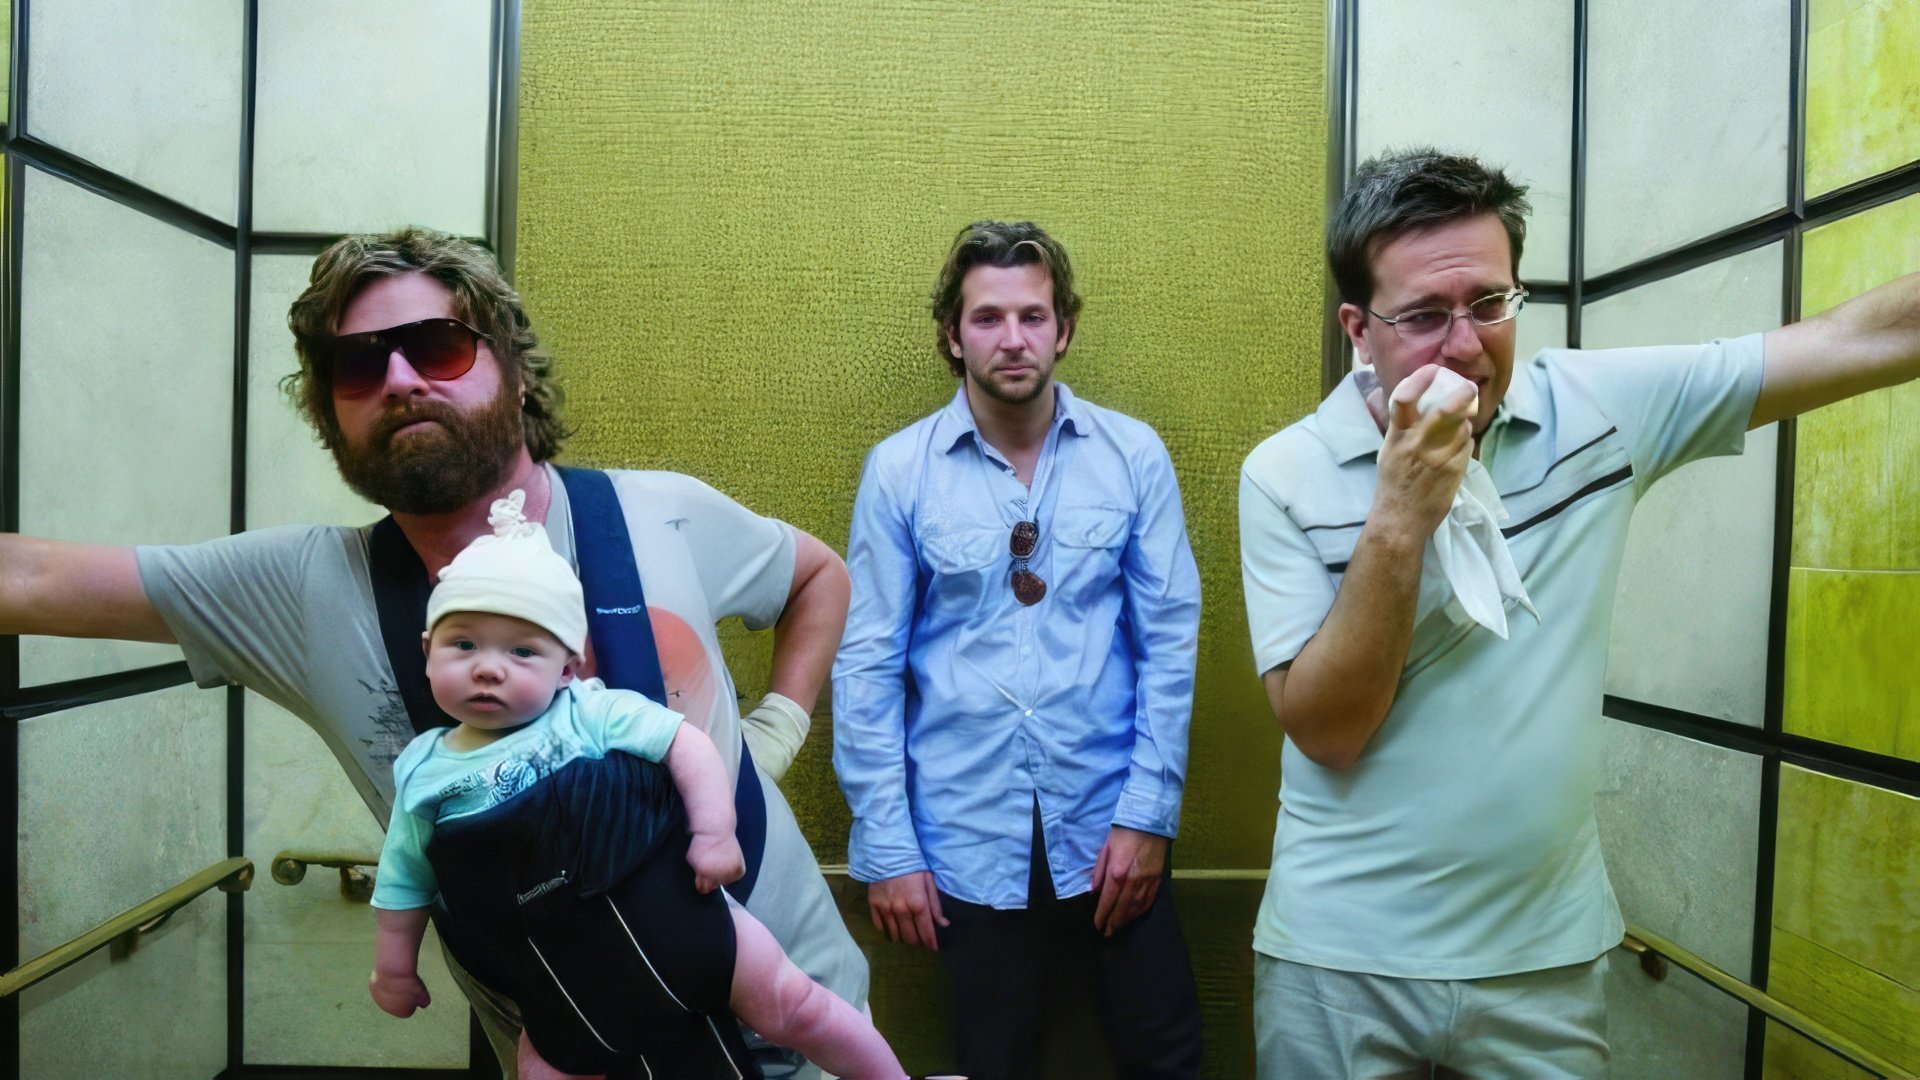 A Frame from The Hangover